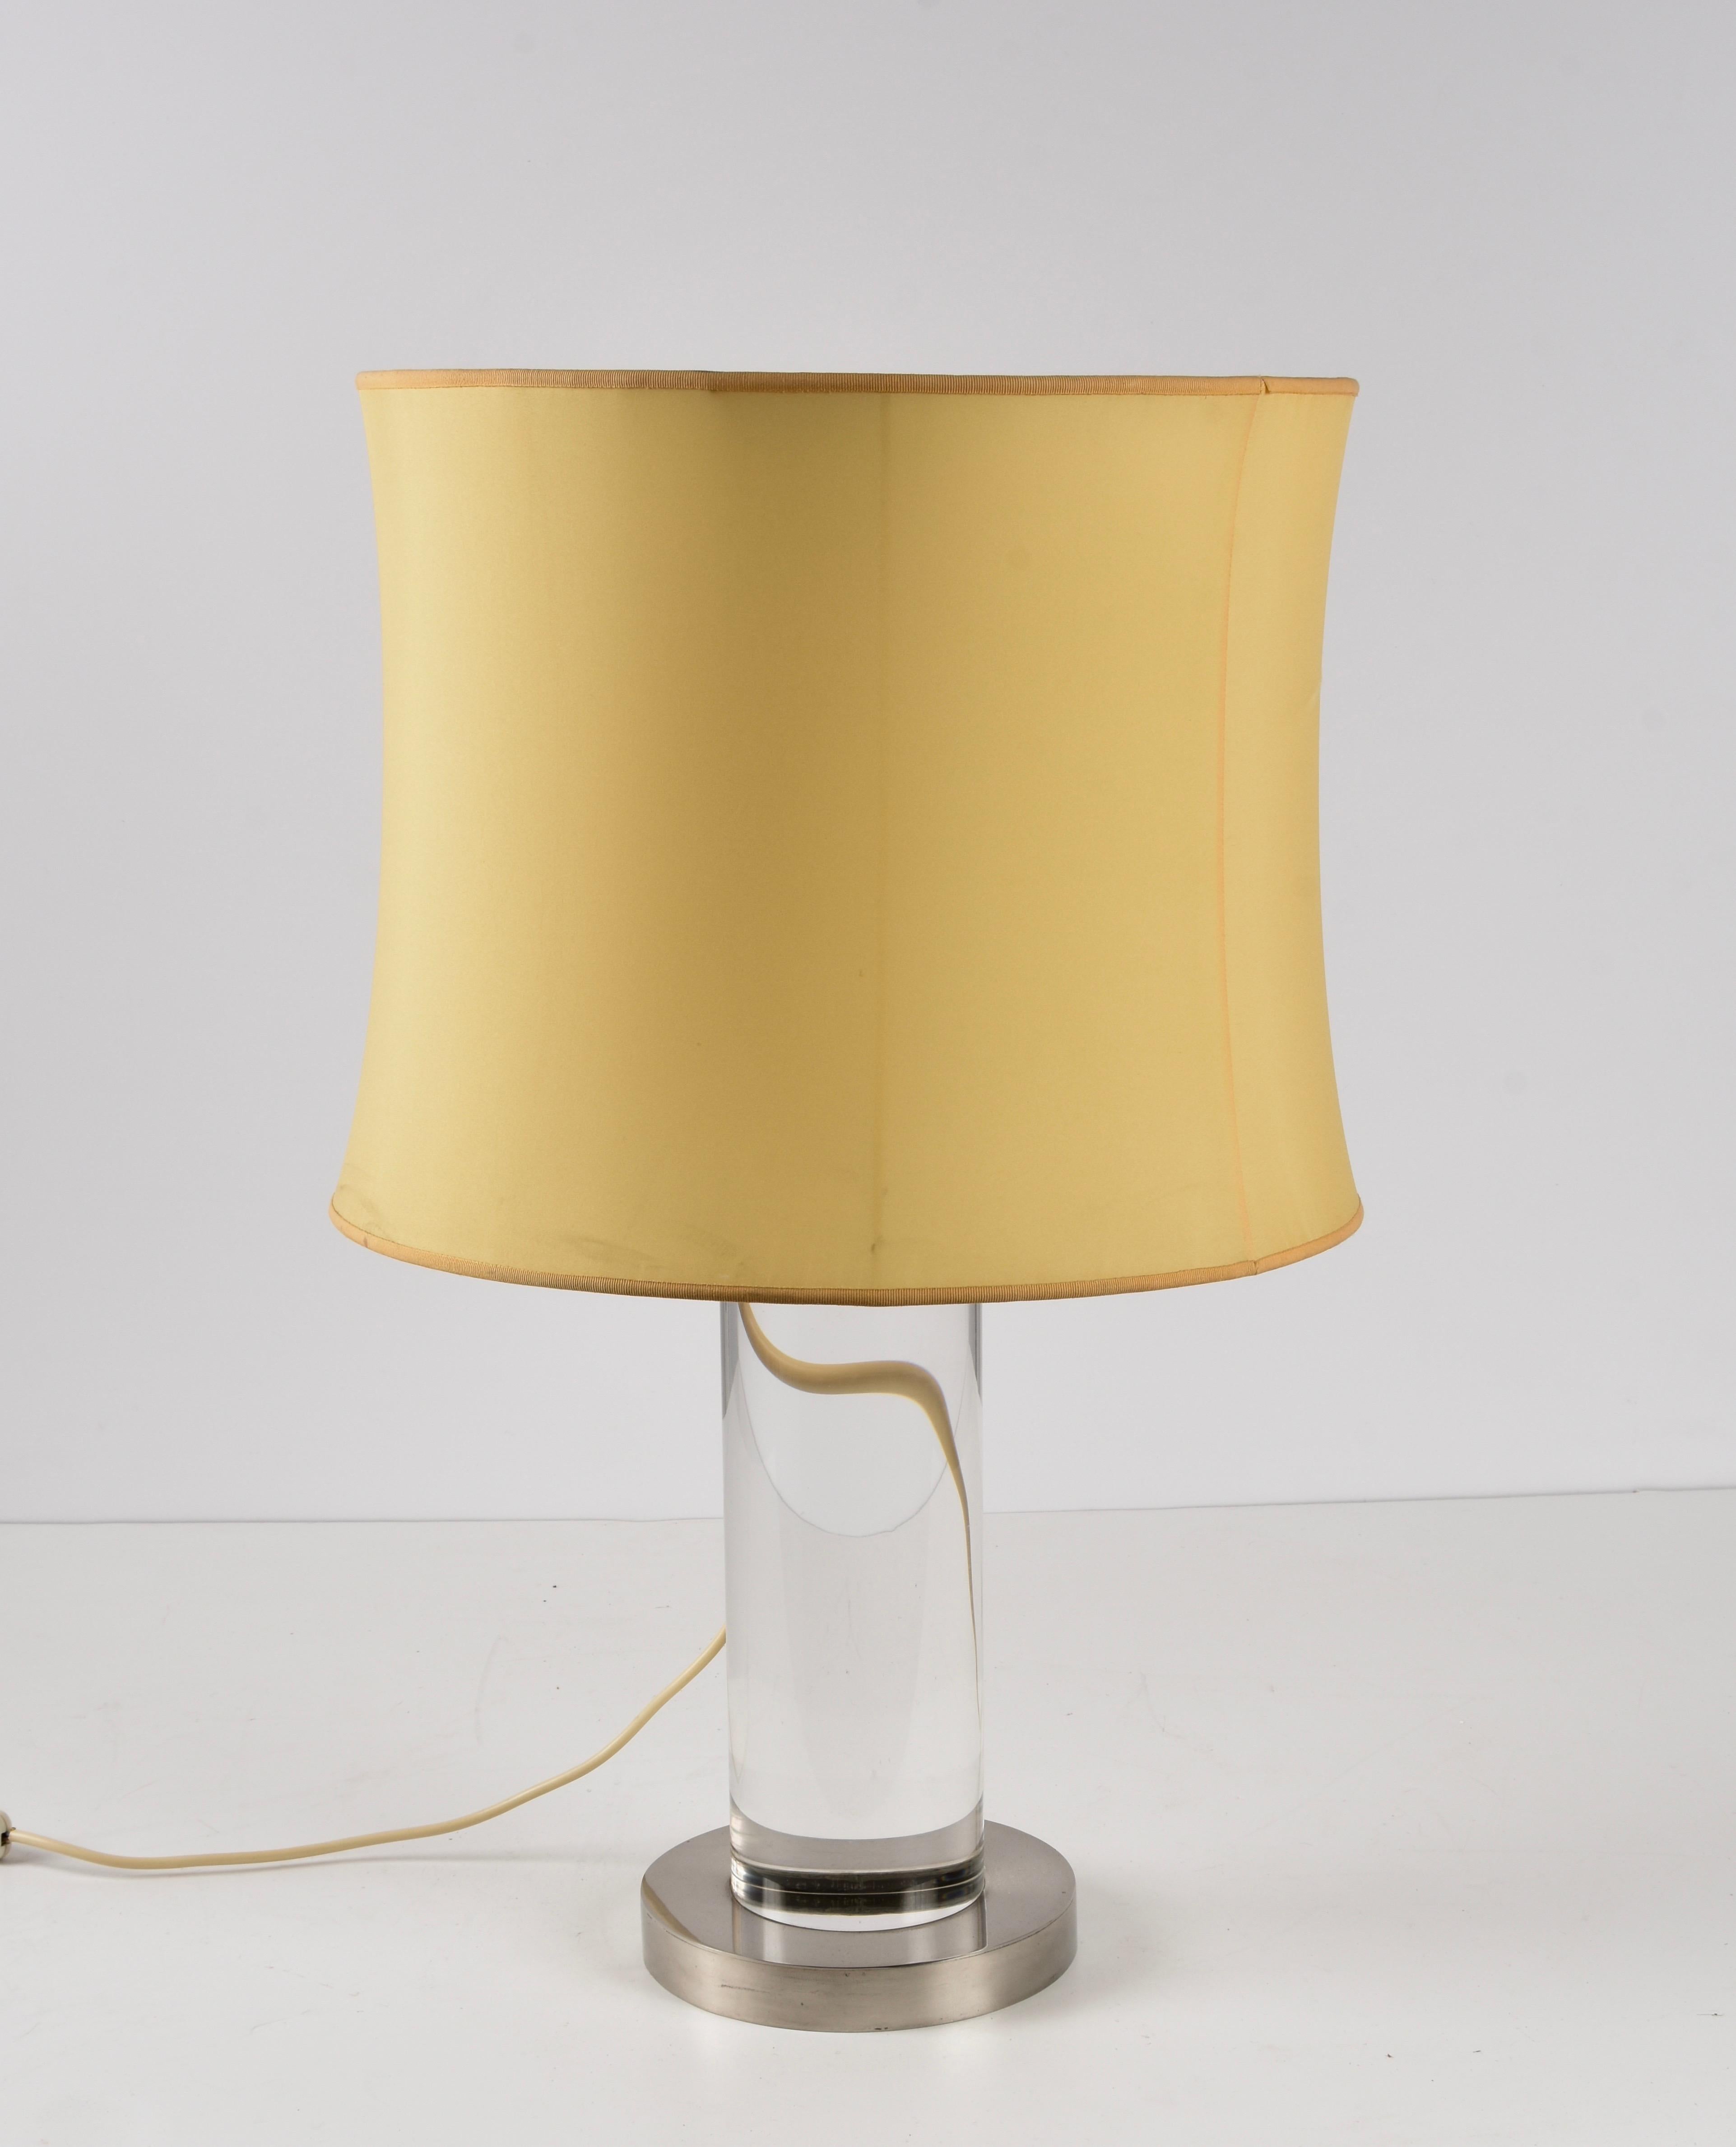 Romeo Rega Midcentury Italian Table Lamp with Lucite Column and Brass Base 1970s For Sale 13